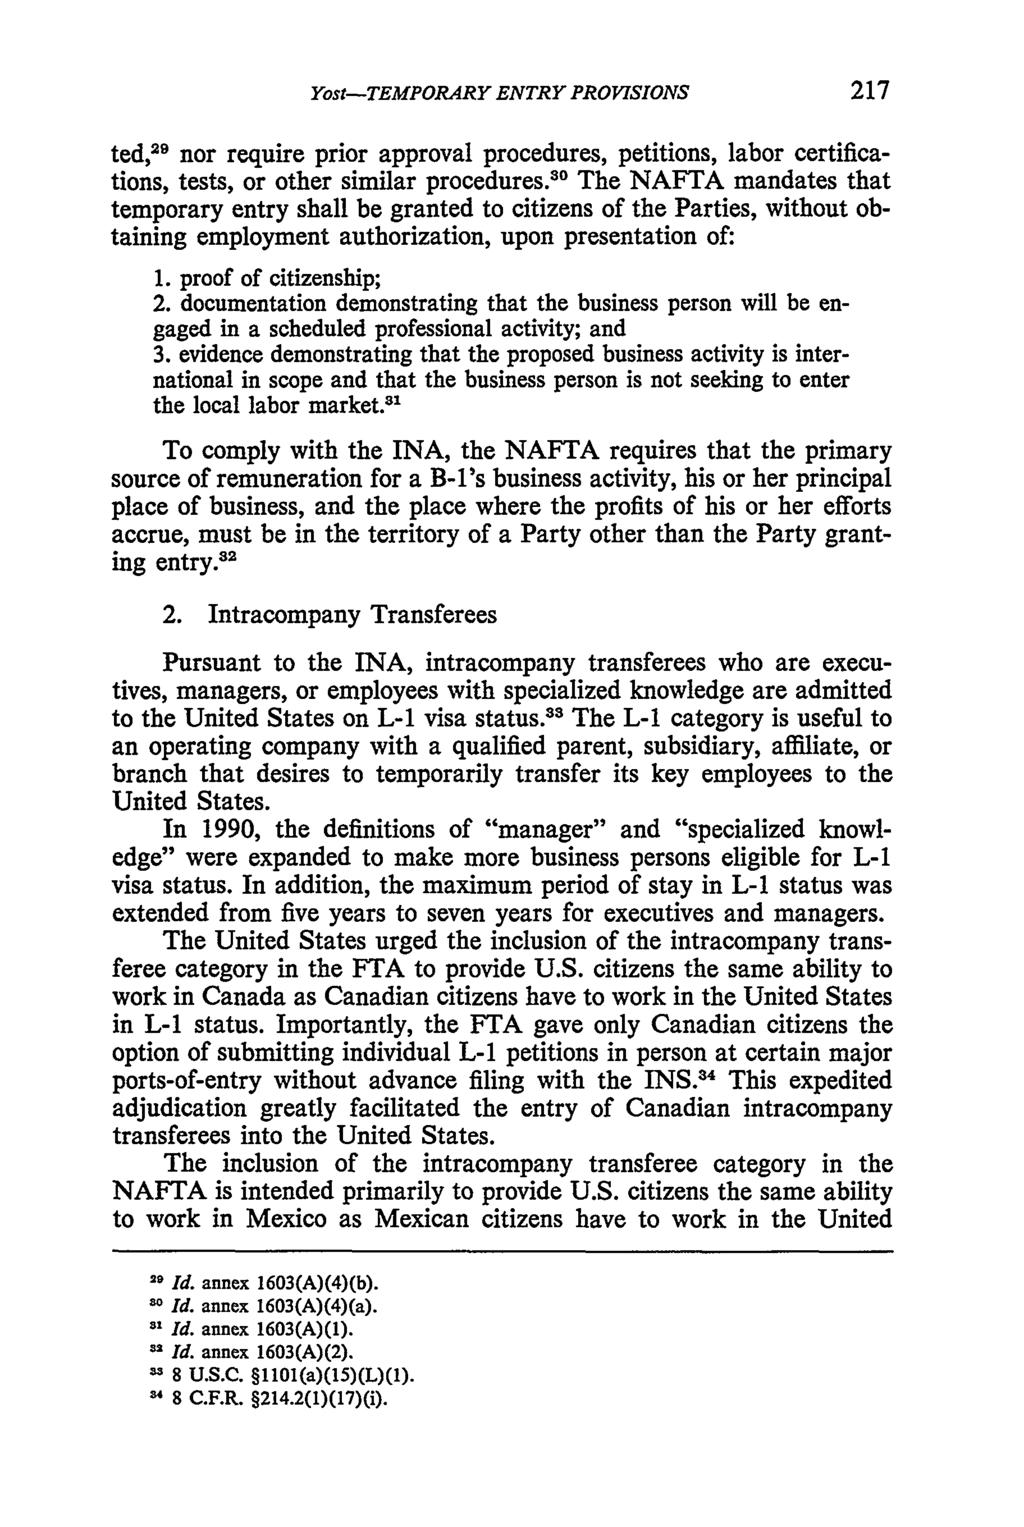 Yost: NAFTA--Temporary Entry Provisions--Immigration Dimensions Yost-TEMPORARY ENTRY PROVISIONS ted, 29 nor require prior approval procedures, petitions, labor certifications, tests, or other similar